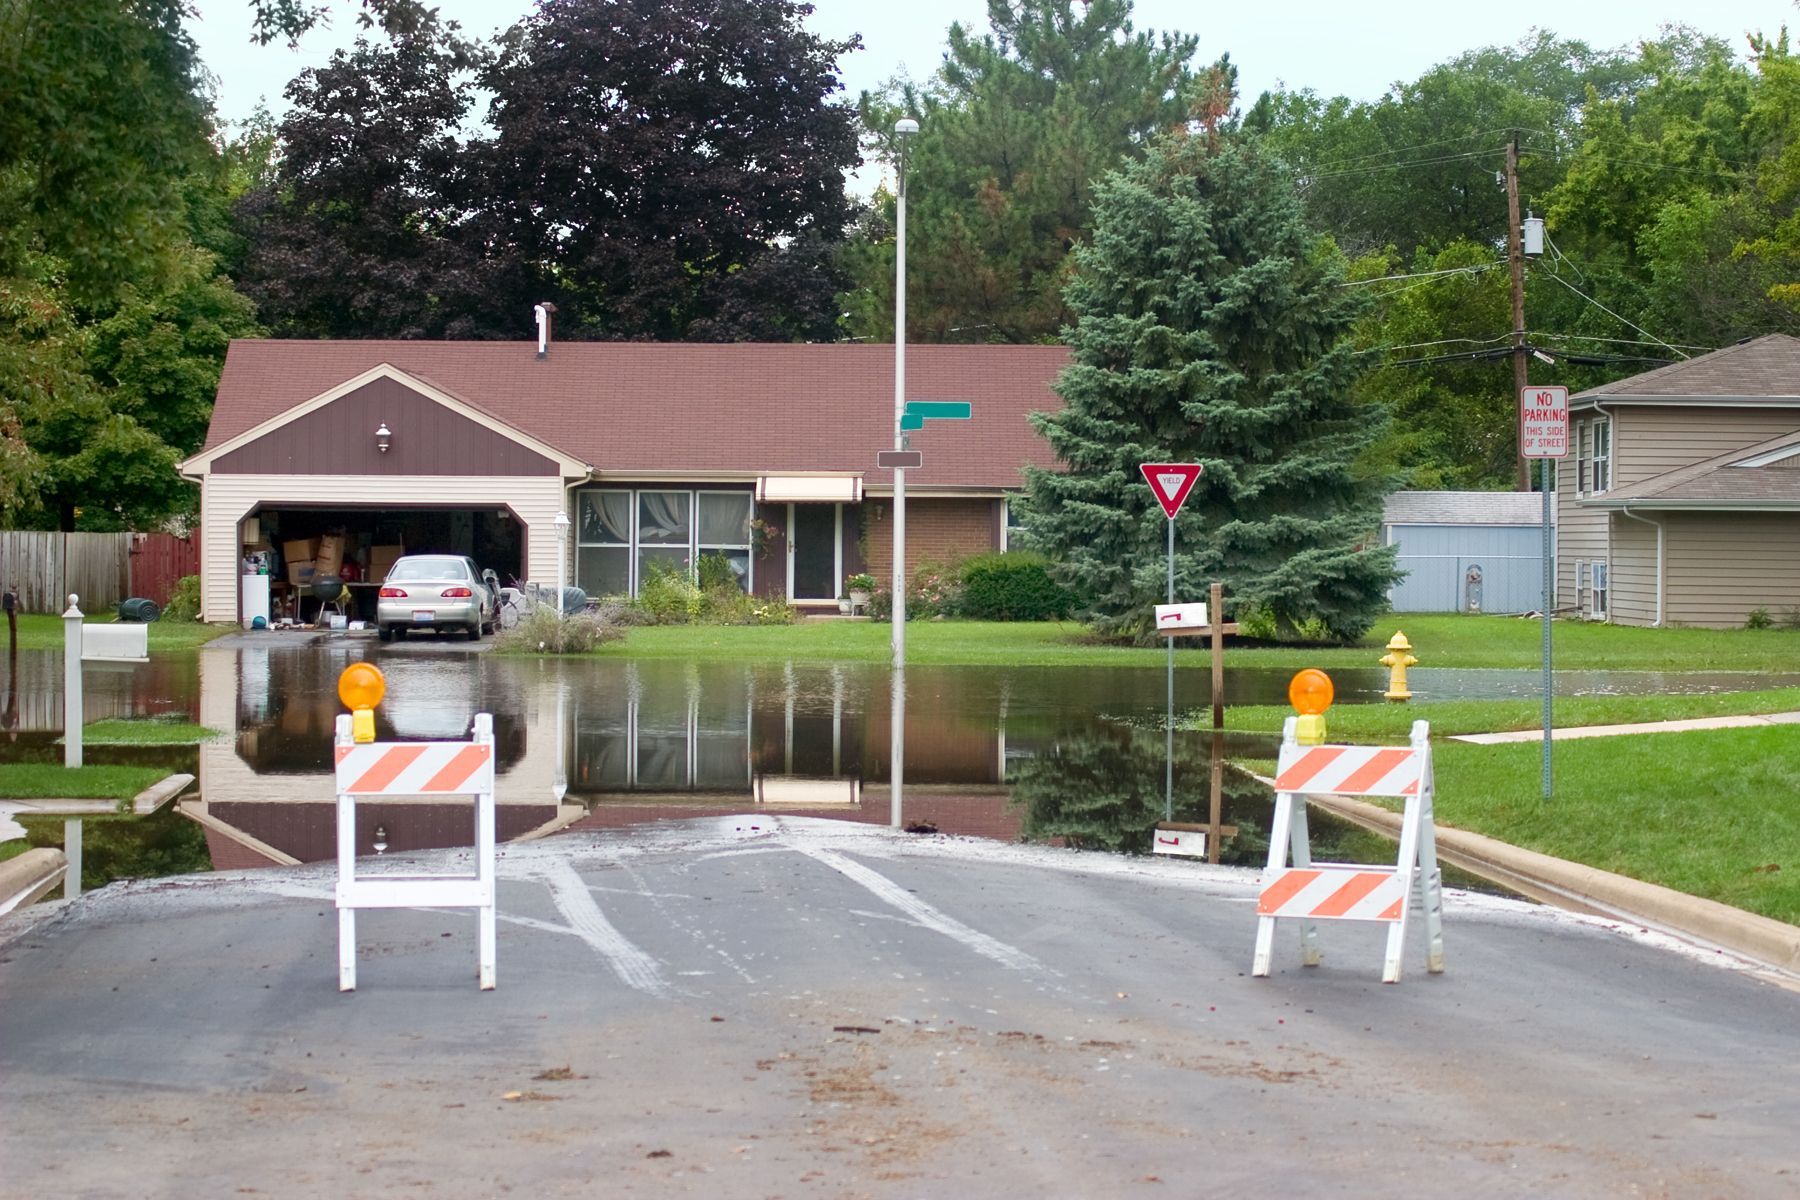 A Flooded Street with a No Parking Sign | Crittenden, KY | TAG